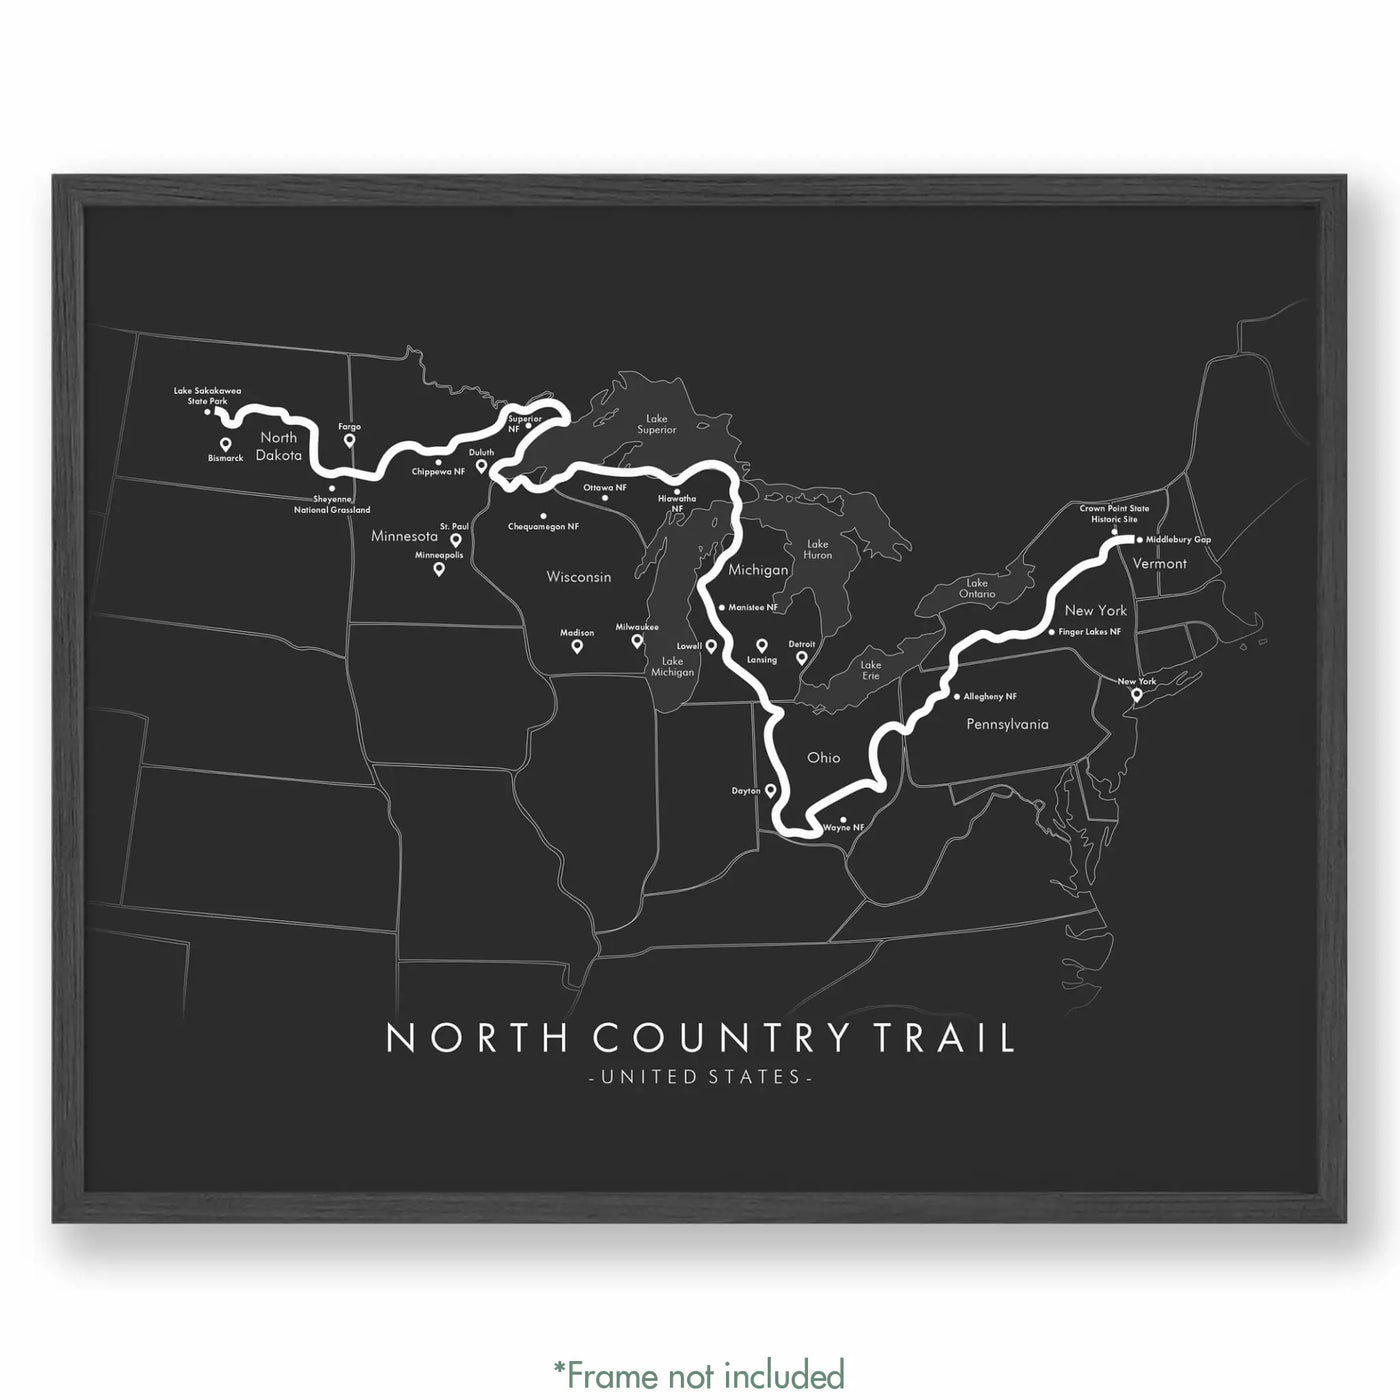 Trail Poster of North Country National Scenic Trail - Grey